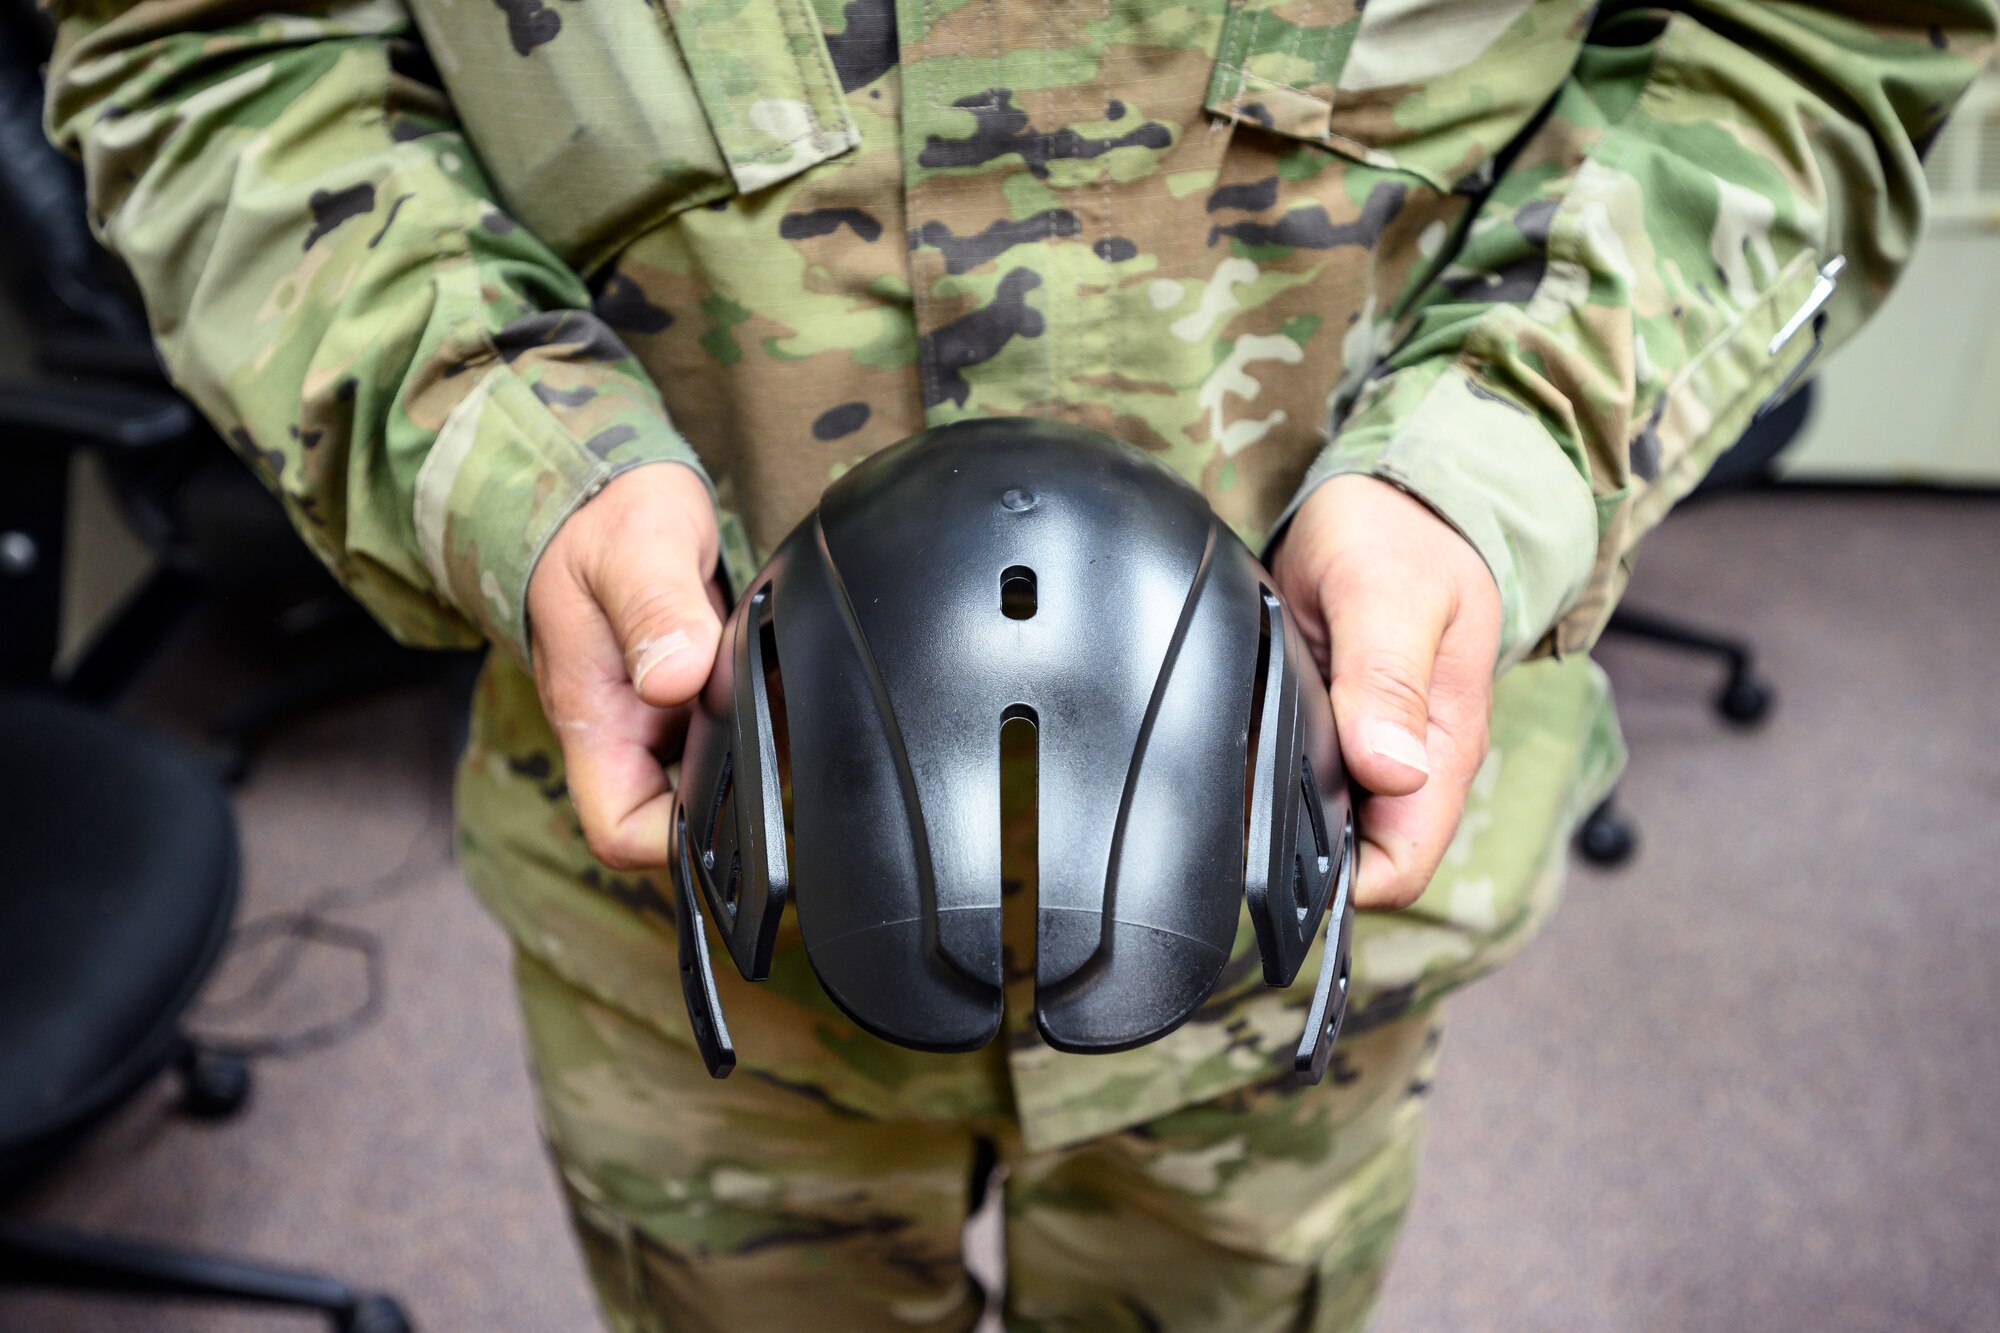 U.S. Air Force Master Sgt. Ryan Smith, 354th Fighter Wing flight safety non-commissioned officer, displays a bump cap prototype Aug. 24, 2021, at Eielson Air Force Base, Alaska. The bump cap, a thin plastic covering designed to fit inside authorized baseball-style tactical caps, aids in keeping maintainers safe from head injuries during the performance of their duties. (U.S. Air Force photo by Staff Sgt. Christian Conrad)